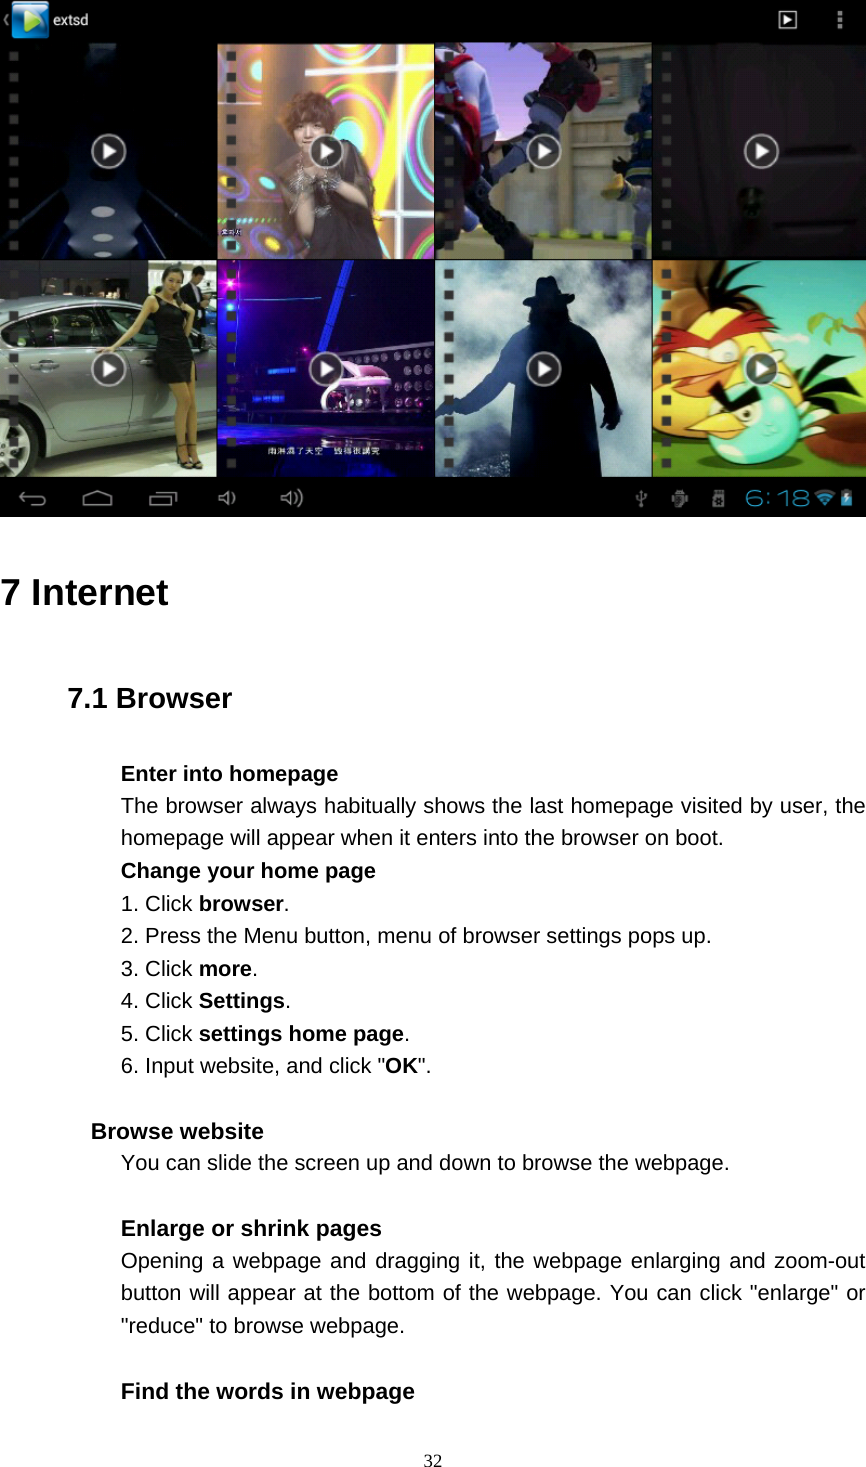    32   7 Internet 7.1 Browser Enter into homepage The browser always habitually shows the last homepage visited by user, the homepage will appear when it enters into the browser on boot. Change your home page 1. Click browser. 2. Press the Menu button, menu of browser settings pops up. 3. Click more. 4. Click Settings. 5. Click settings home page. 6. Input website, and click &quot;OK&quot;.  Browse website You can slide the screen up and down to browse the webpage.  Enlarge or shrink pages Opening a webpage and dragging it, the webpage enlarging and zoom-out button will appear at the bottom of the webpage. You can click &quot;enlarge&quot; or &quot;reduce&quot; to browse webpage.  Find the words in webpage 